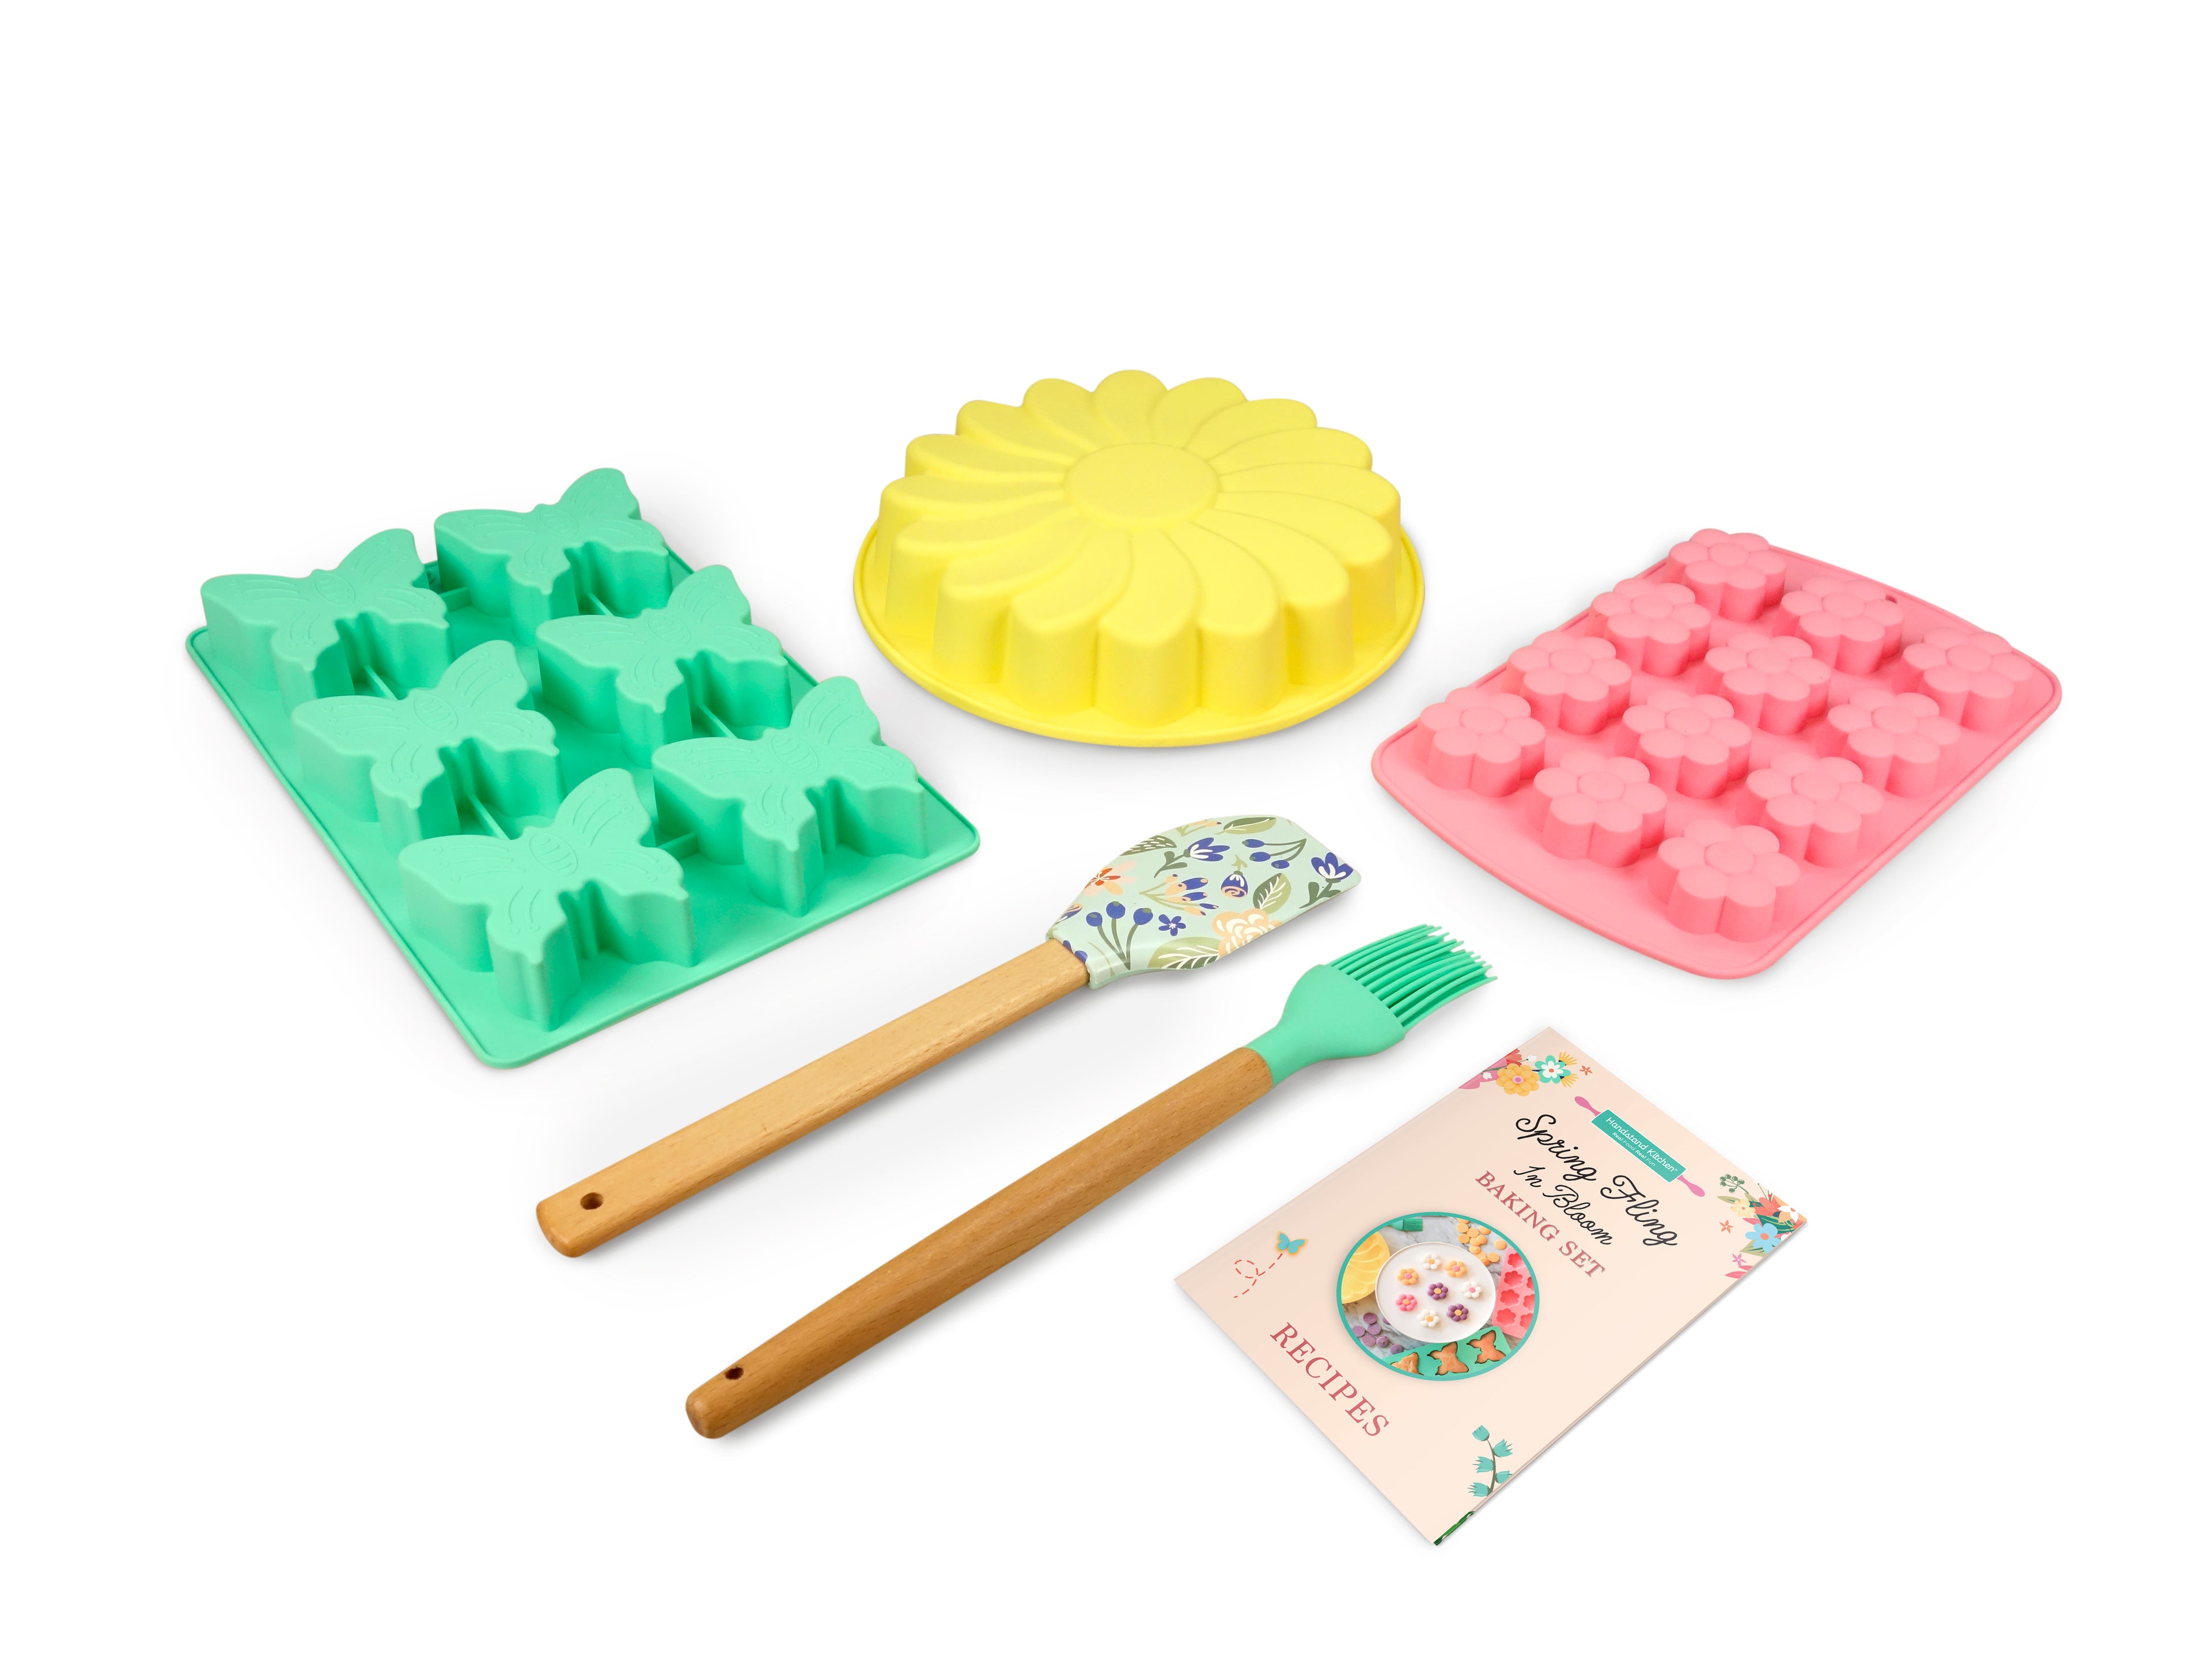 Out of box image of Spring Fling In Bloom Baking Set which includes 1 Silicone Daisy Cake Mold, 1 Silicone Butterfly Cupcake Mold, 1 Silicone Mini Daisy Mold, 1 Silicone Spatula, 1 Silicone Pastry Brush and Recipes